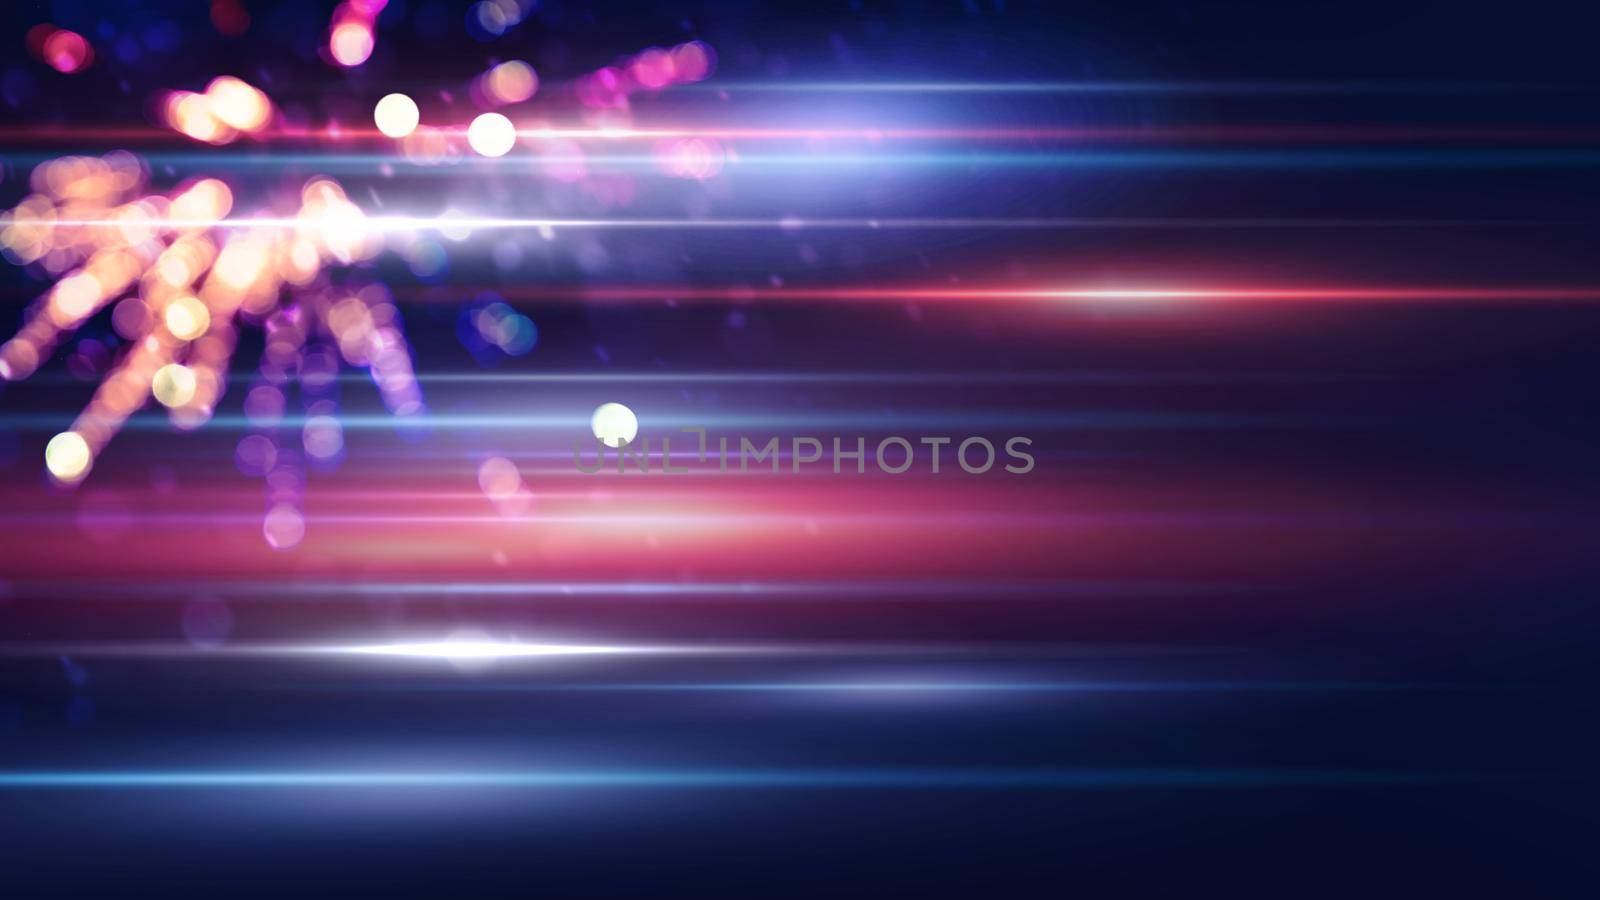 American flag lights and colors abstract background,  labor day and elections